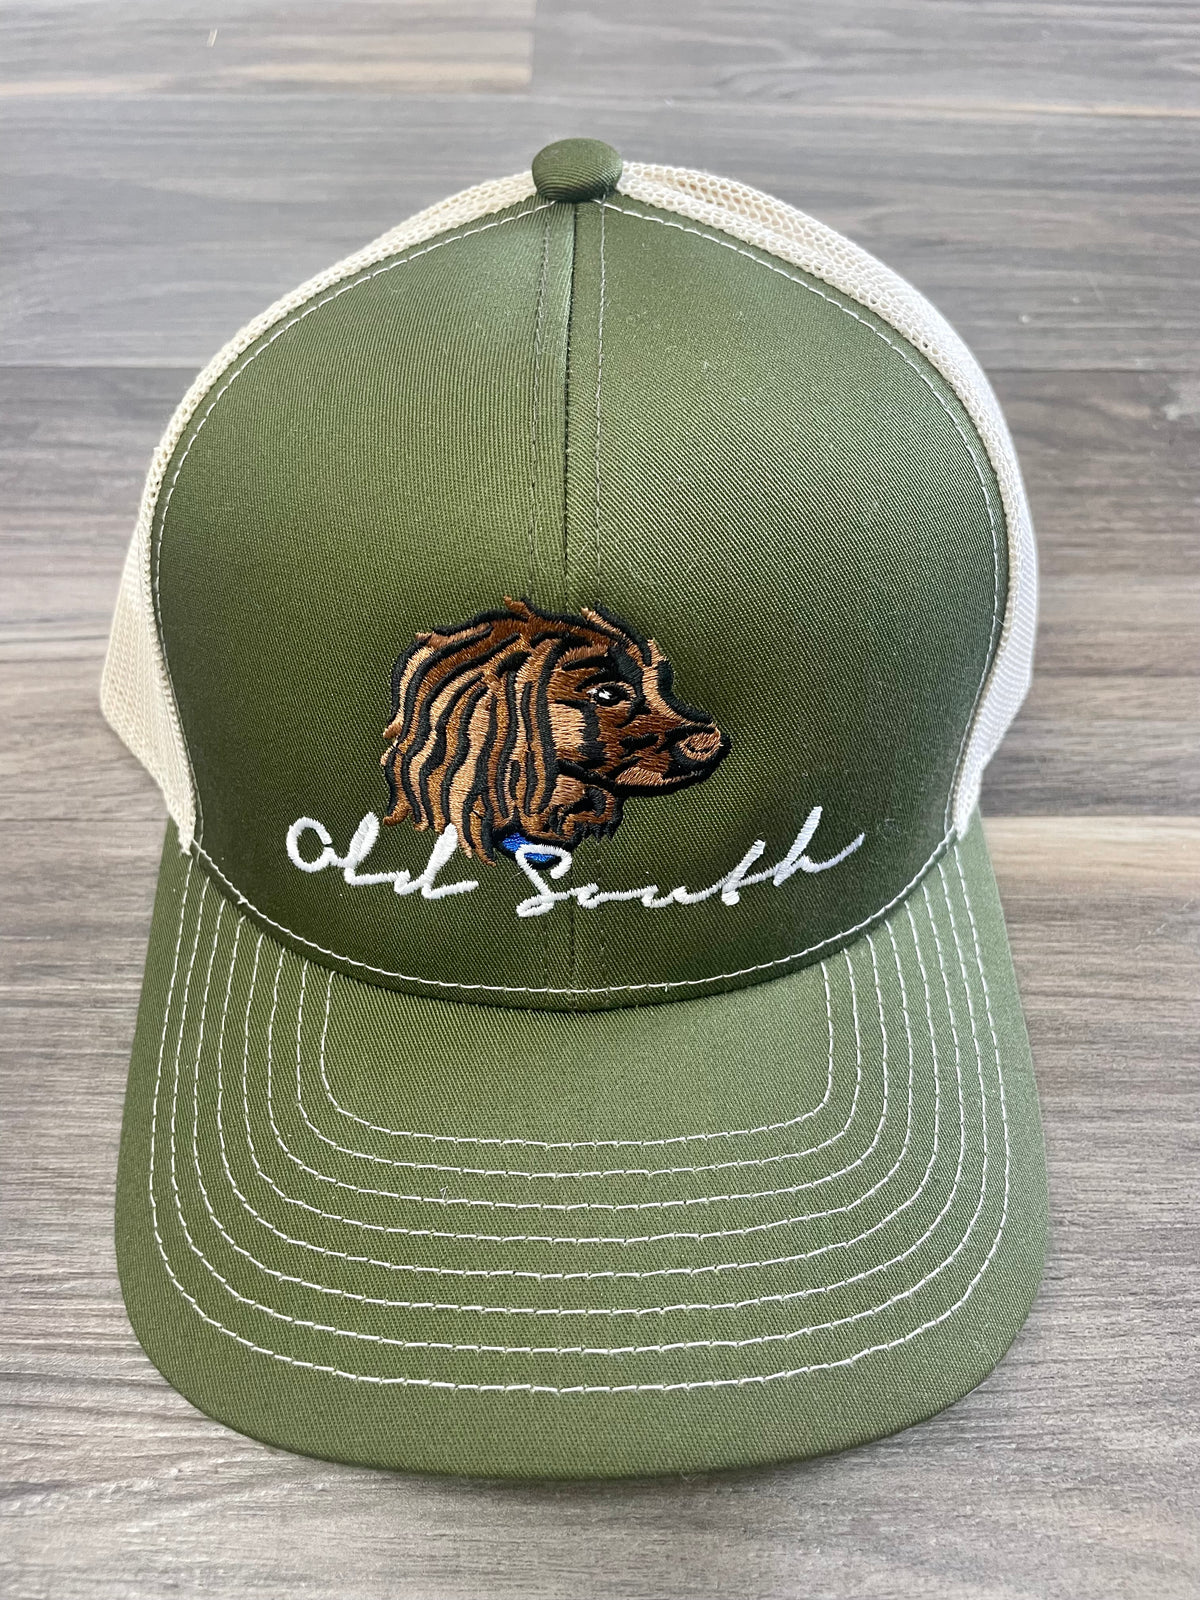 Old South Trucker Hat